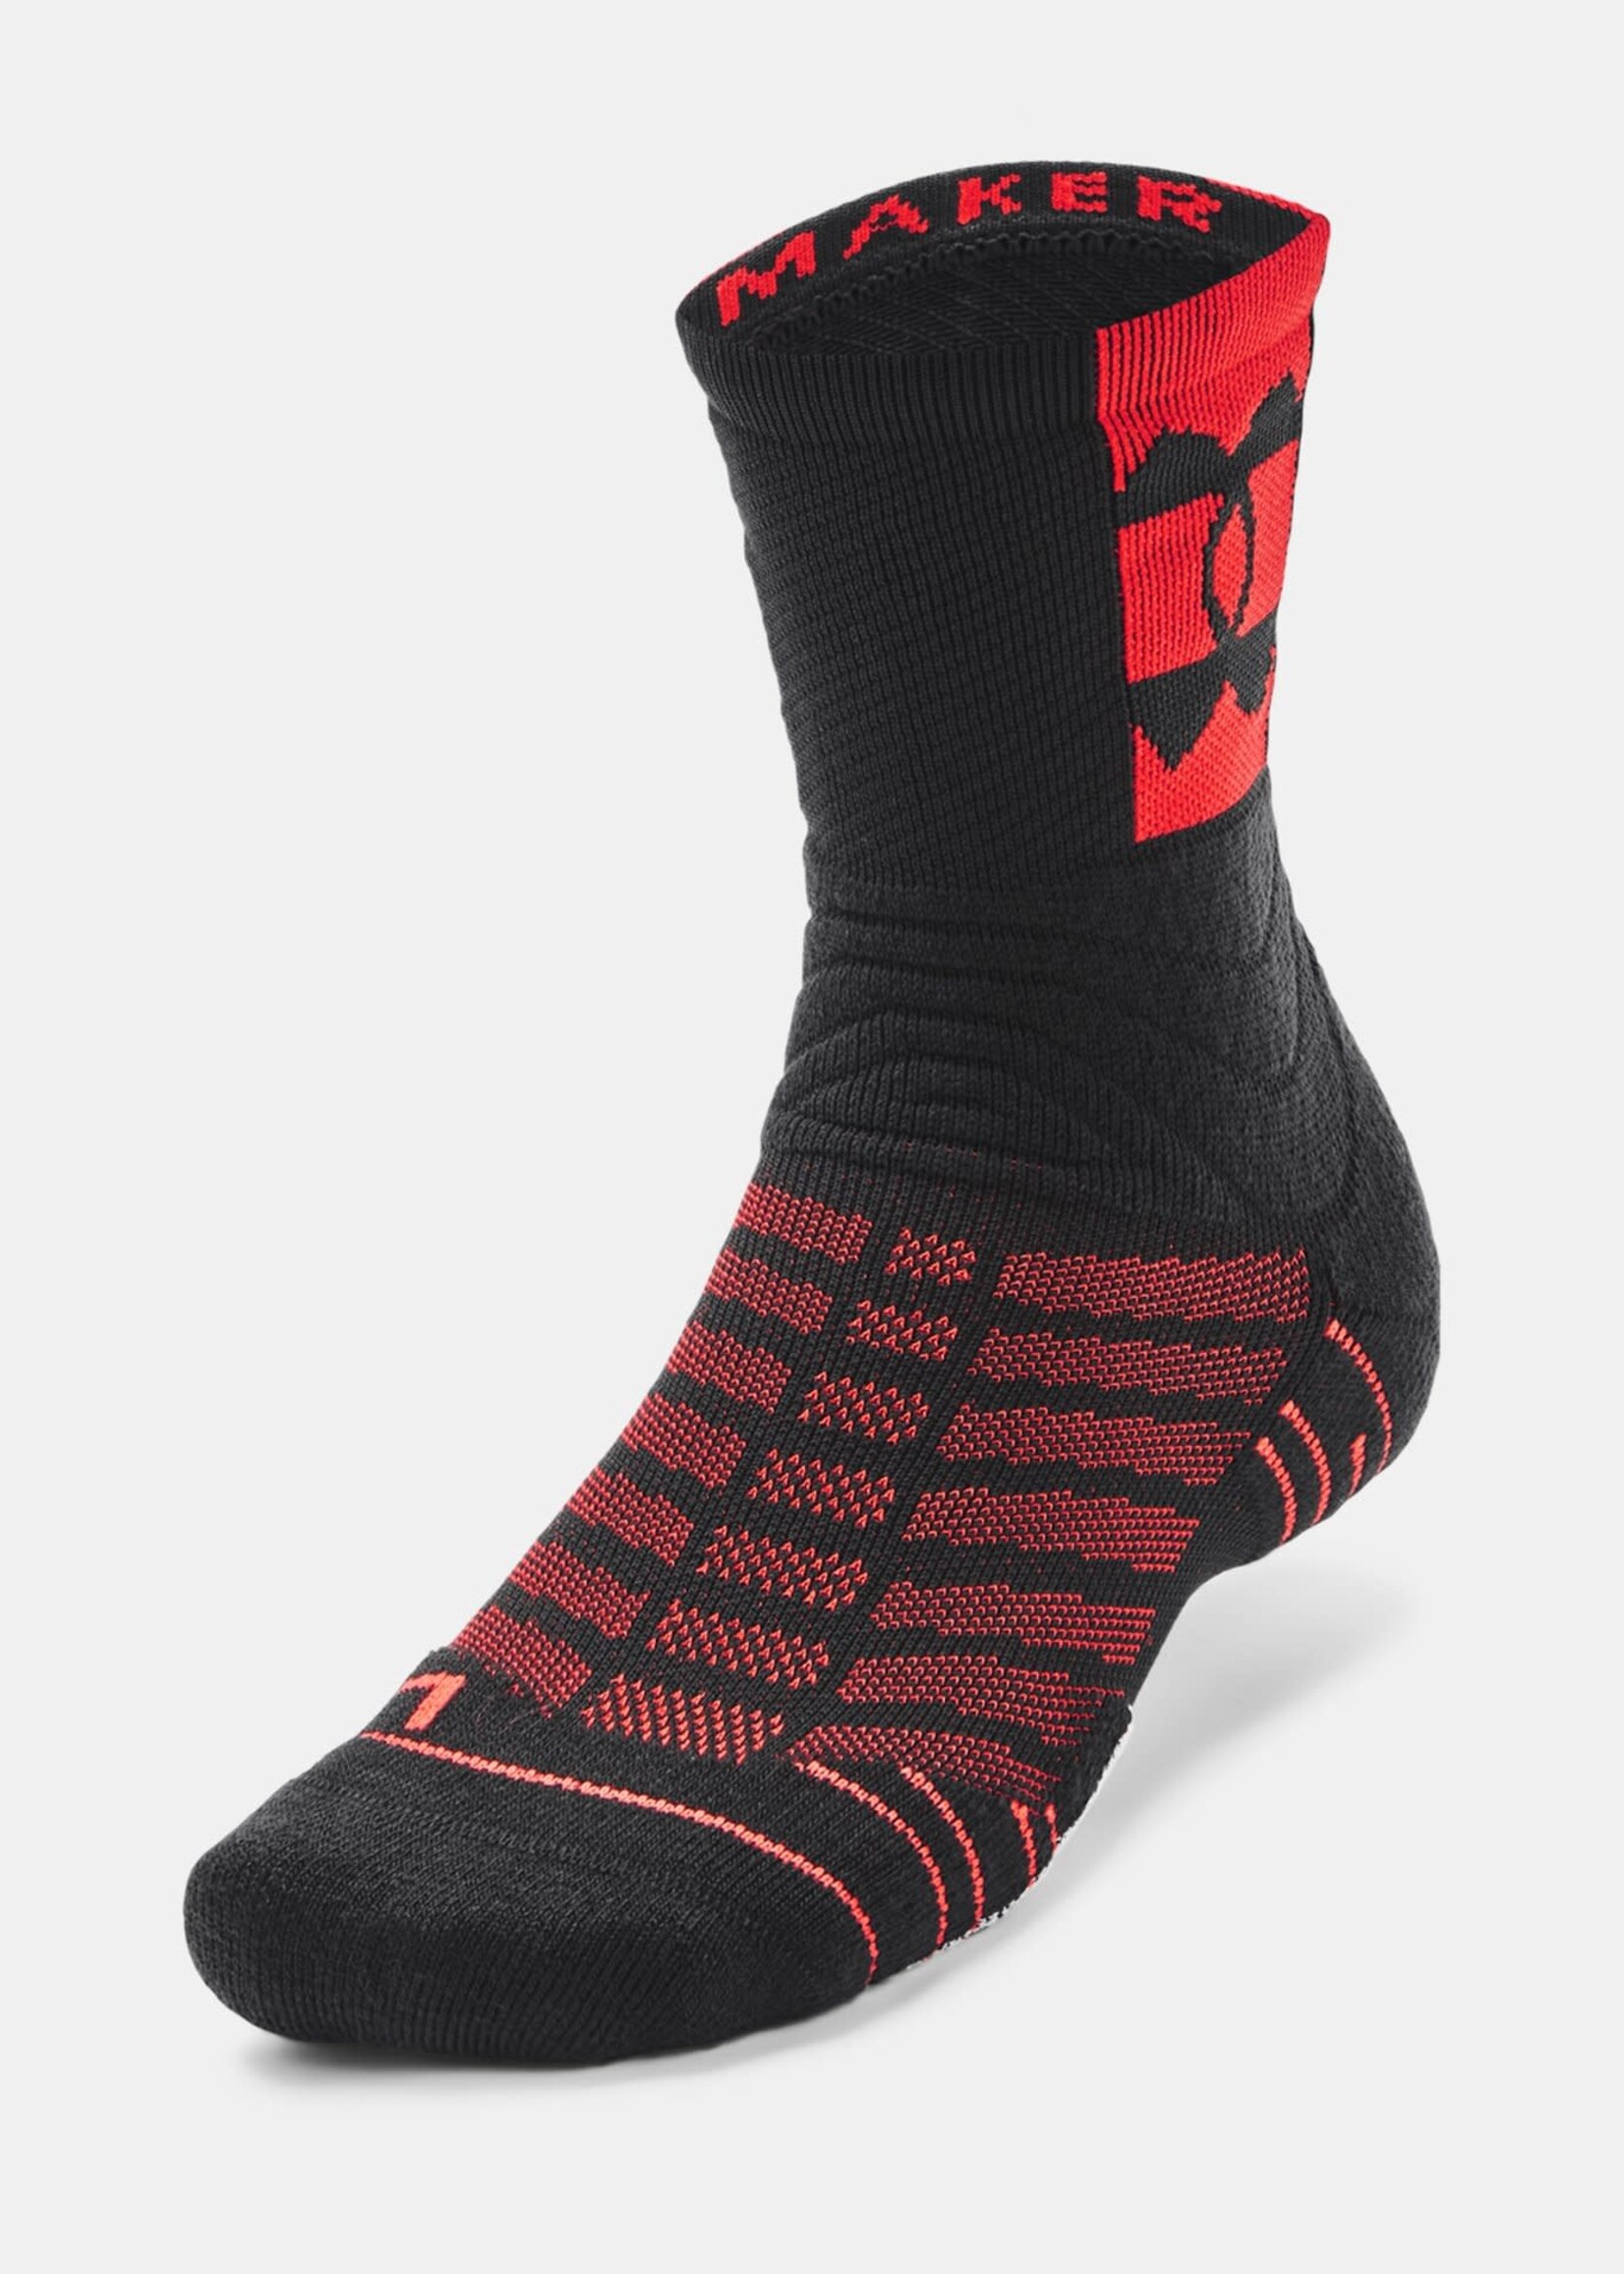 Under Armour Playmaker Crew Socks Black Red